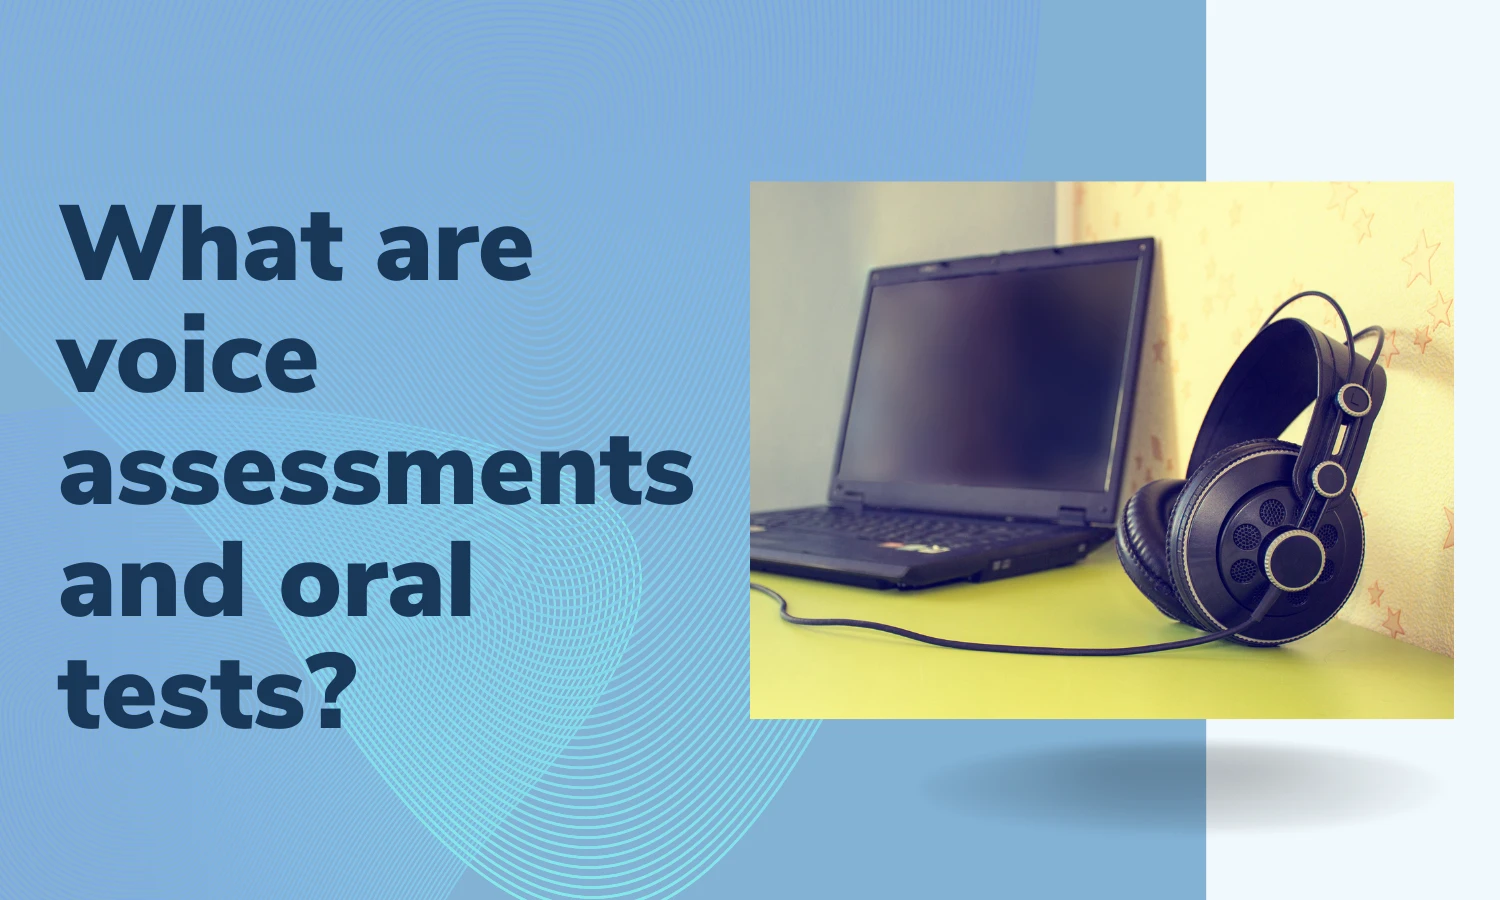 How can voice assessments and oral tests be conducted in online mode